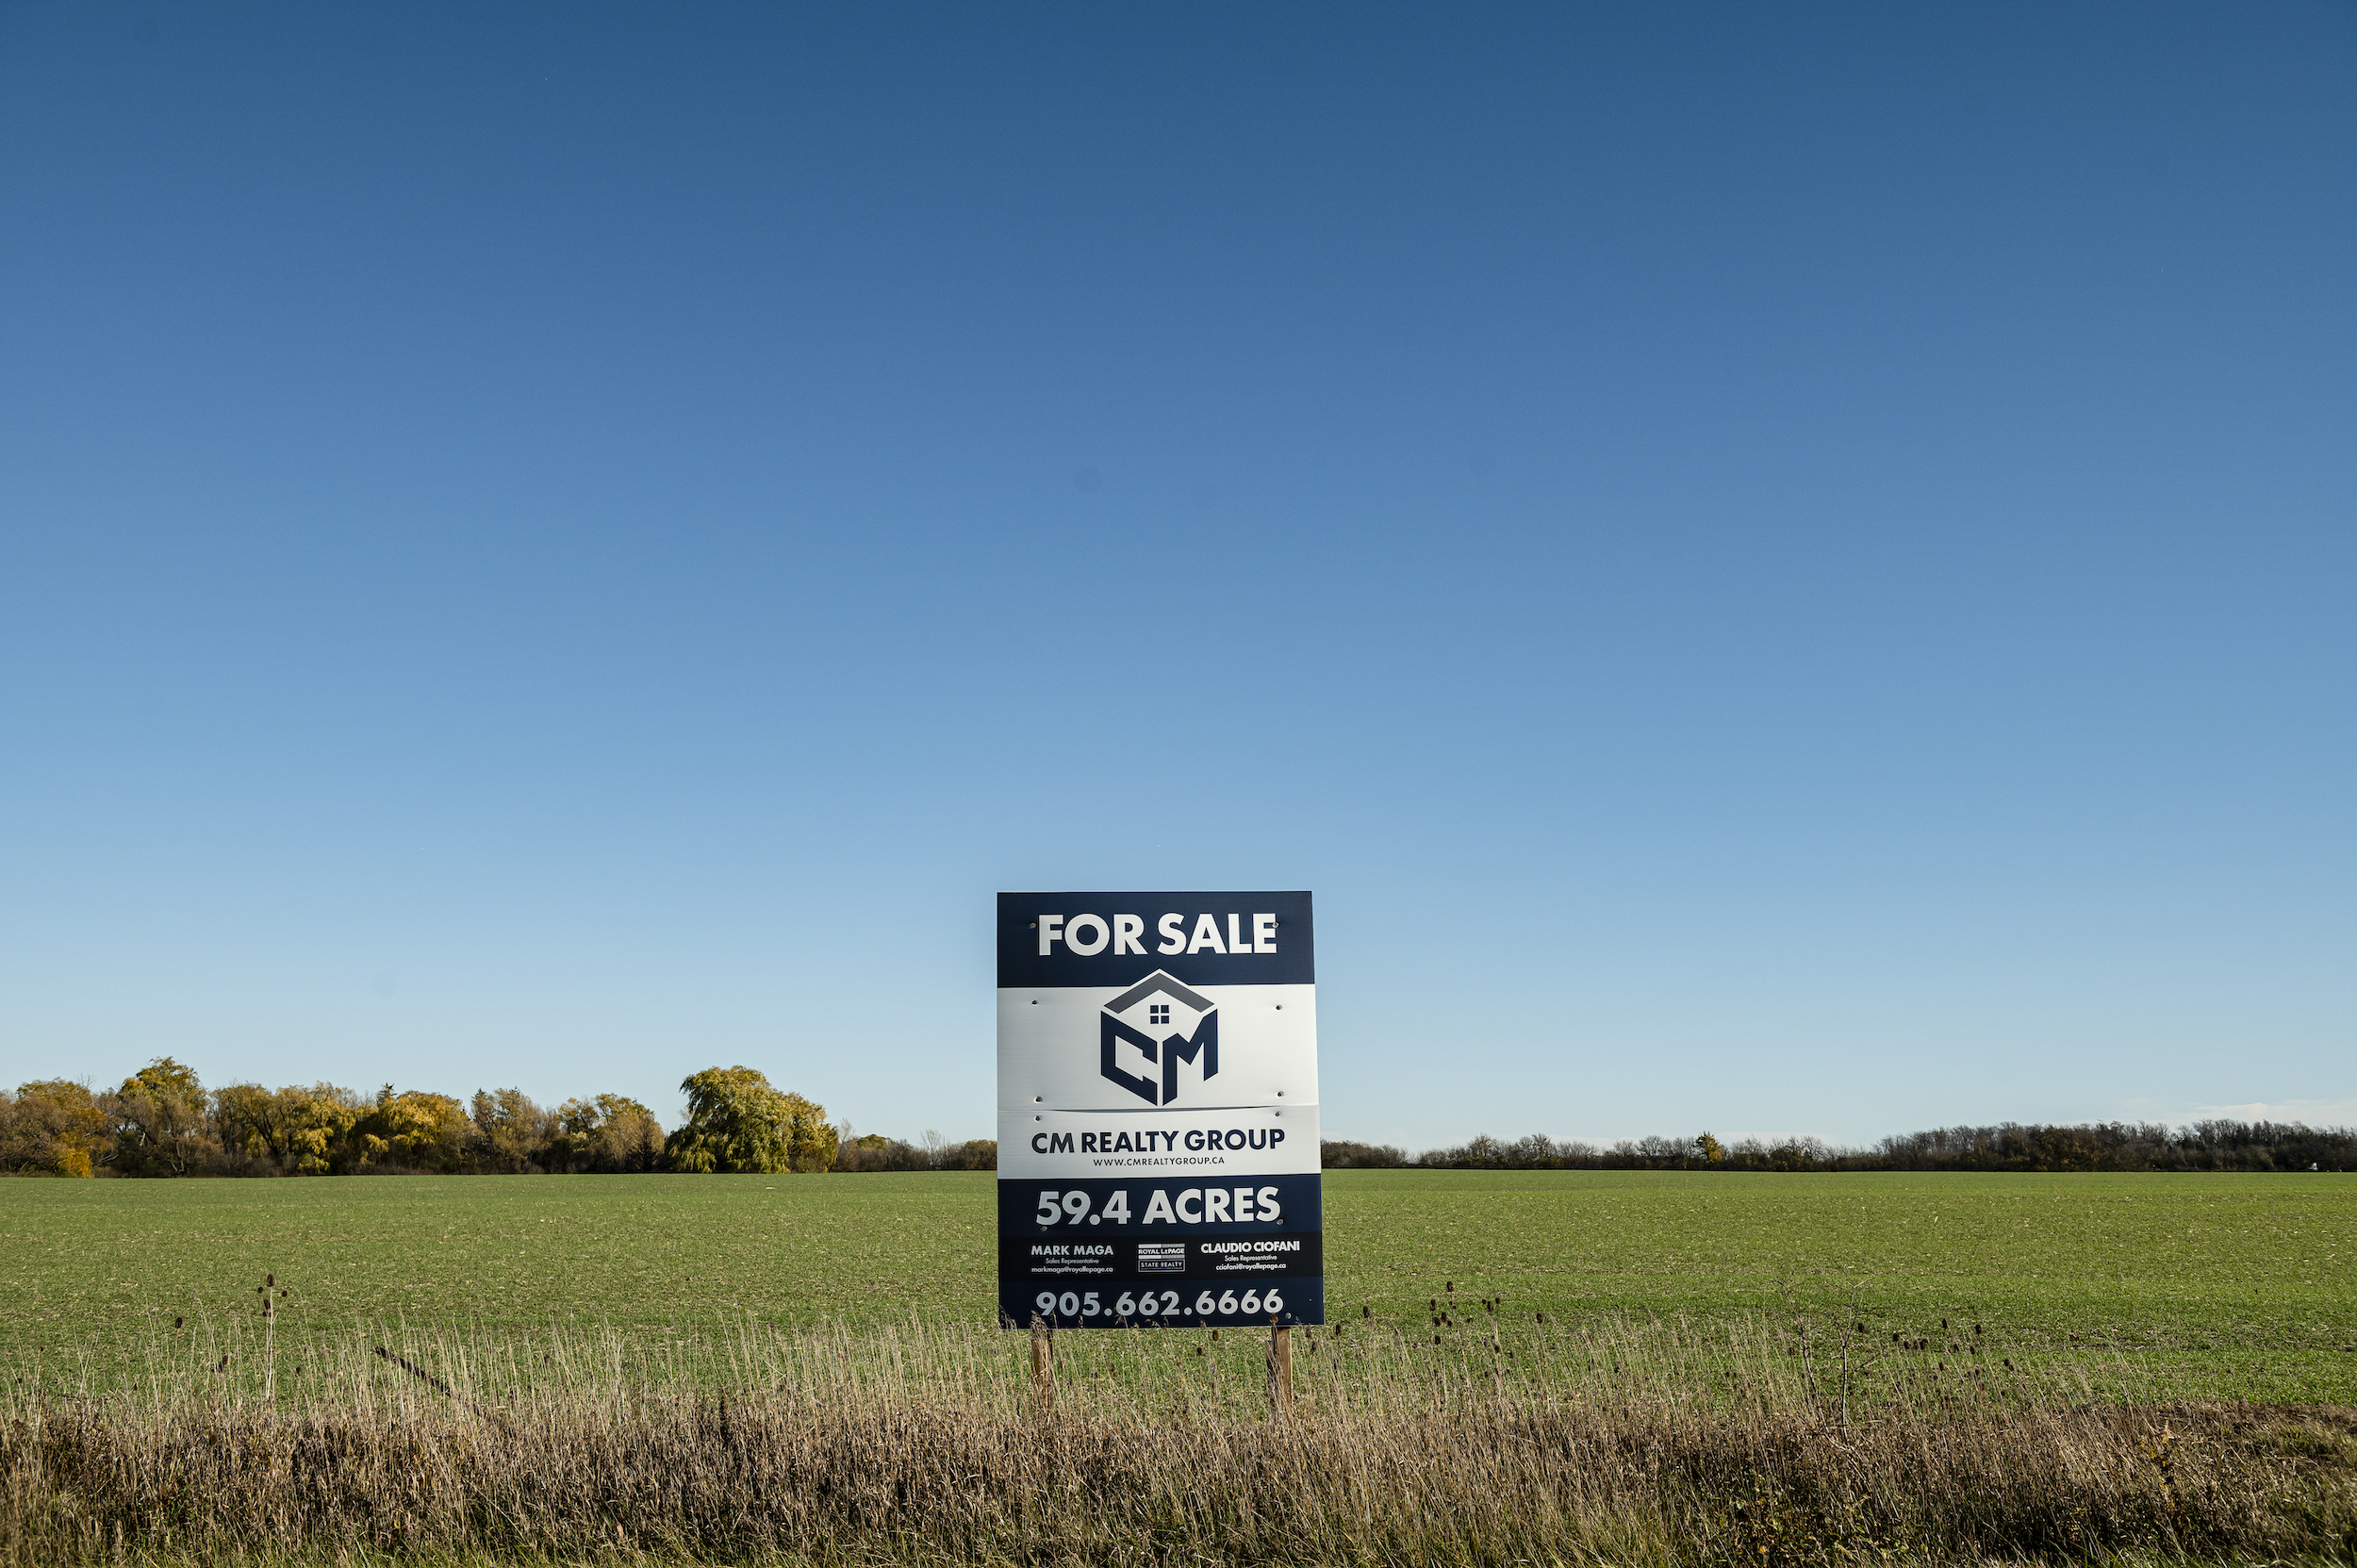 A farm in Stoney Creek, Ont., with a for sale sign